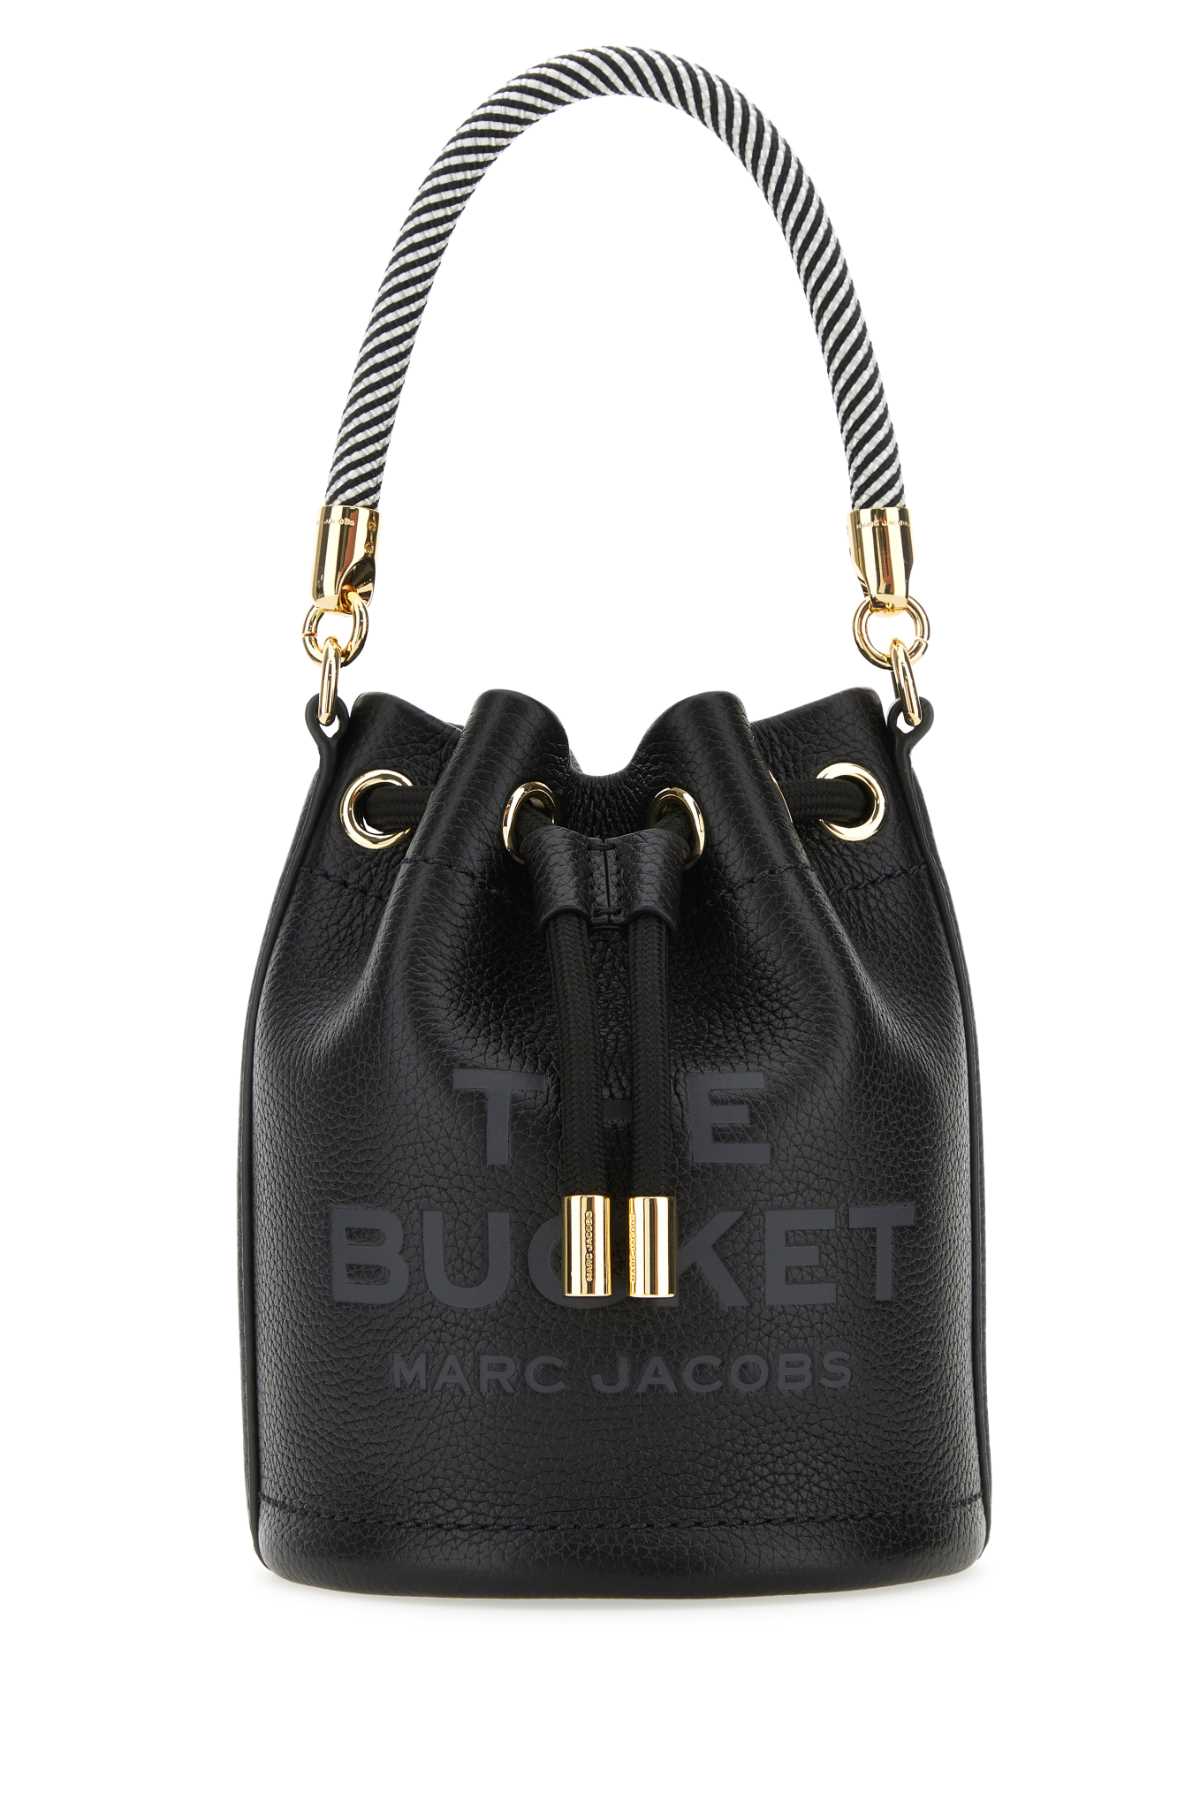 Marc Jacobs Black Leather Micro The Bucket Bucket Bag In 001